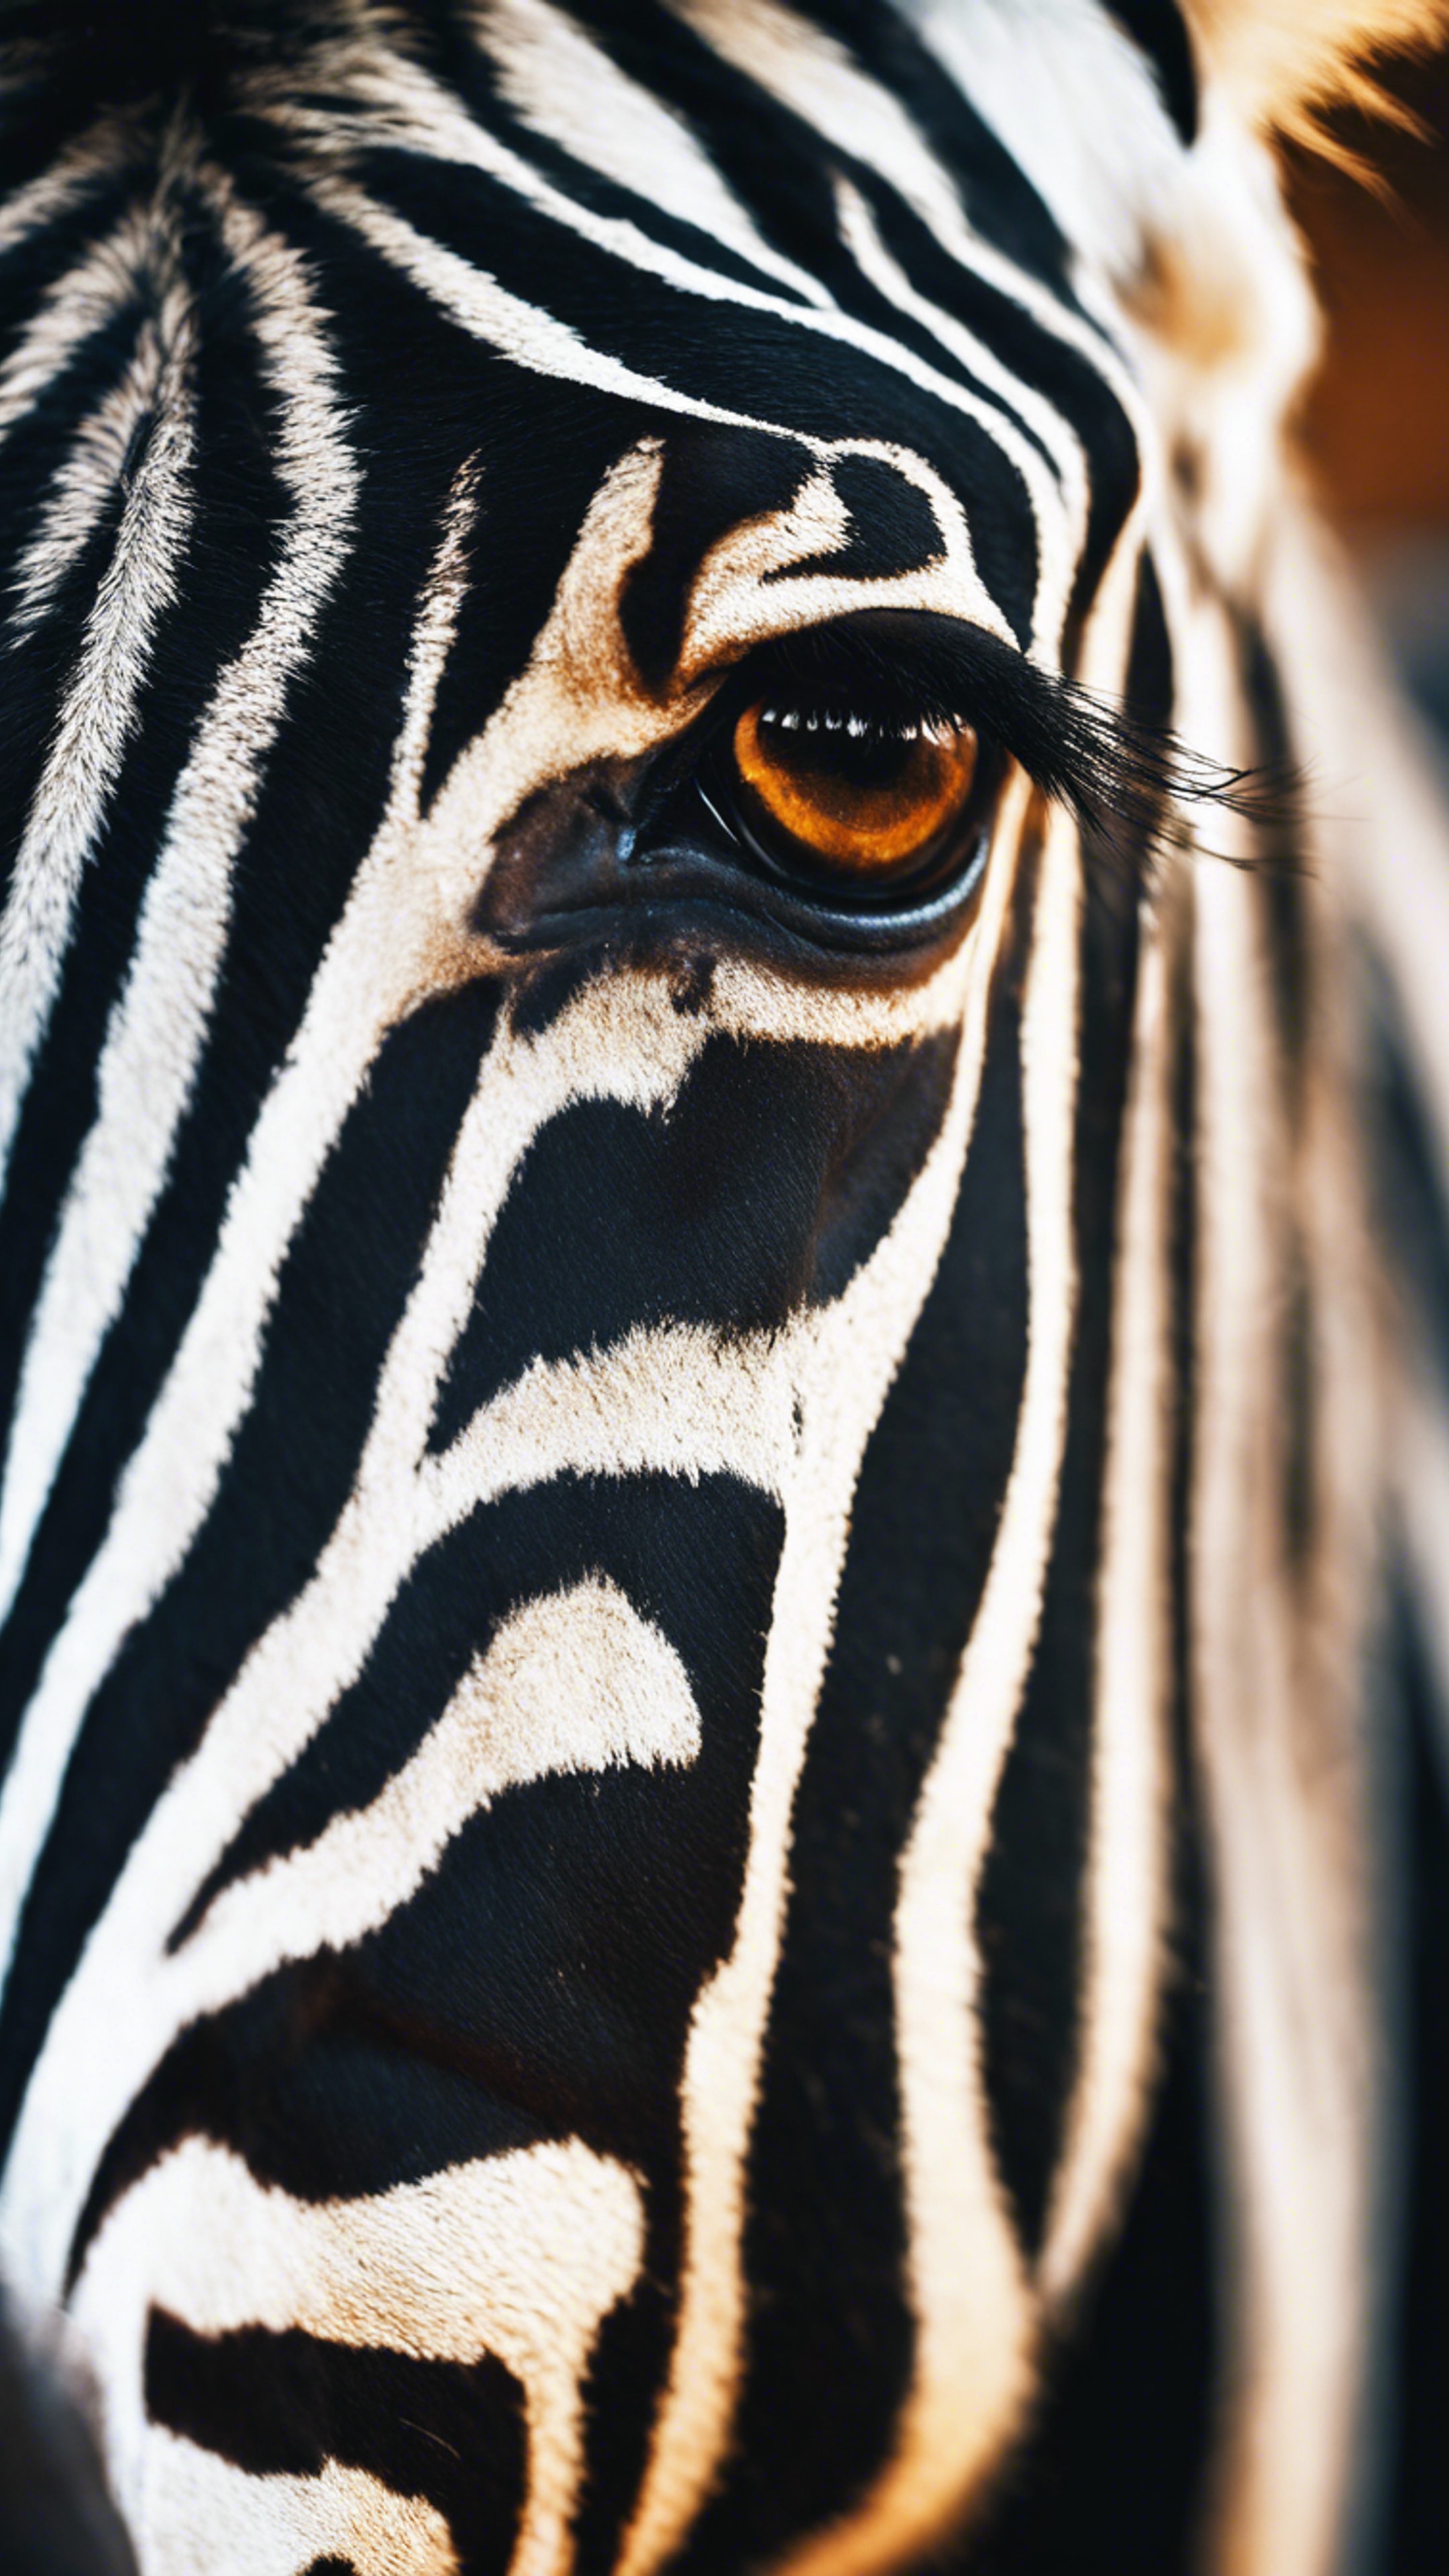 A close-up shot of a zebra's eye expressing strong emotions. Kertas dinding[ea30c6a0b471421fa723]